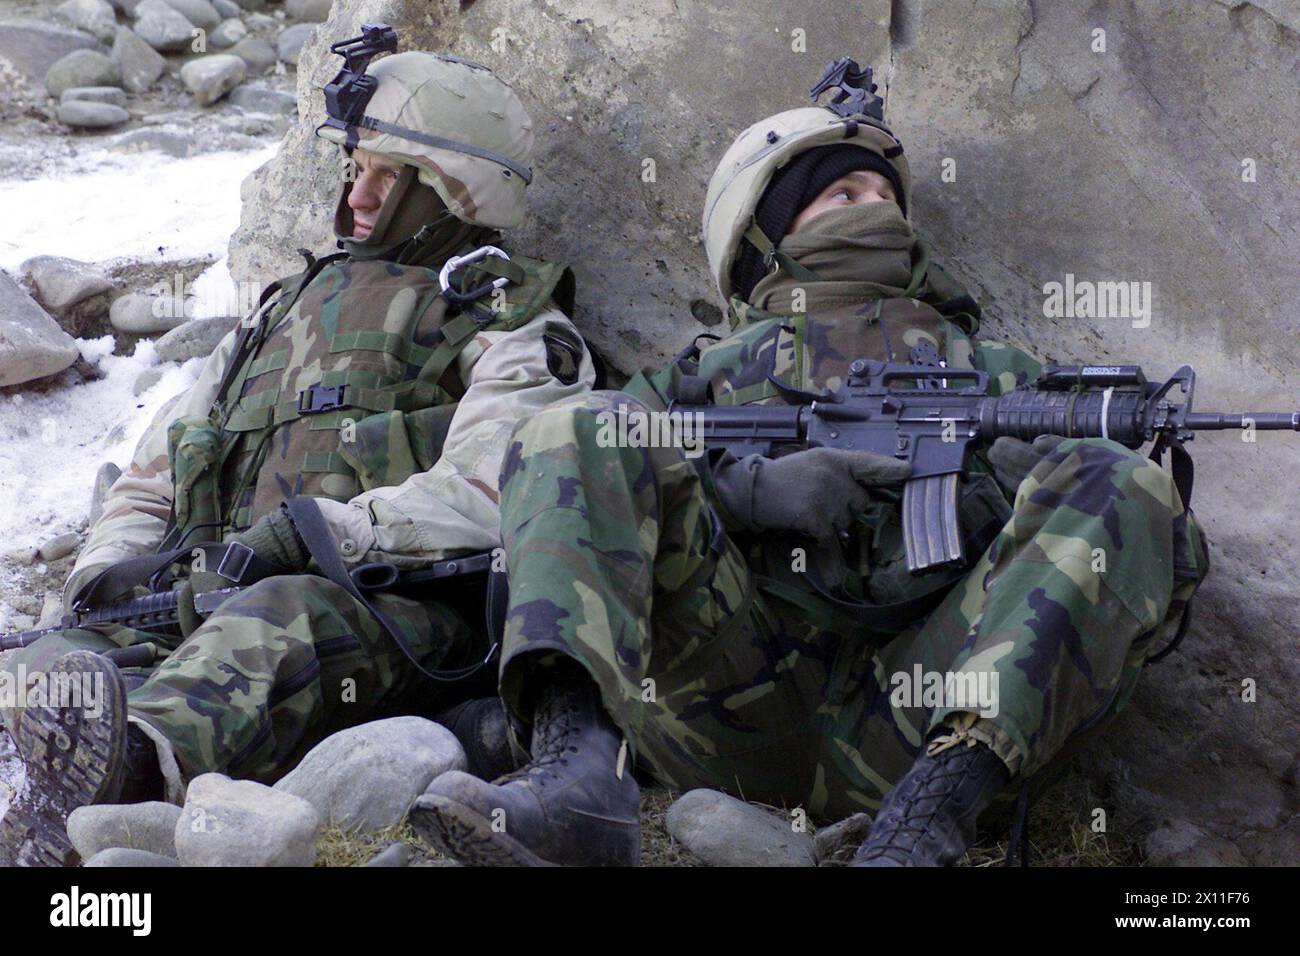 Original Caption: U.S. Army Soldiers with the 1st Battalion, 187th Infantry Regiment, 101st Airborne Division (Air Assault), scan the nearby ridgeline for enemy movement during Operation Anaconda (Afghanistan), March 4, 2002 ca. April 03, 2004 Stock Photo